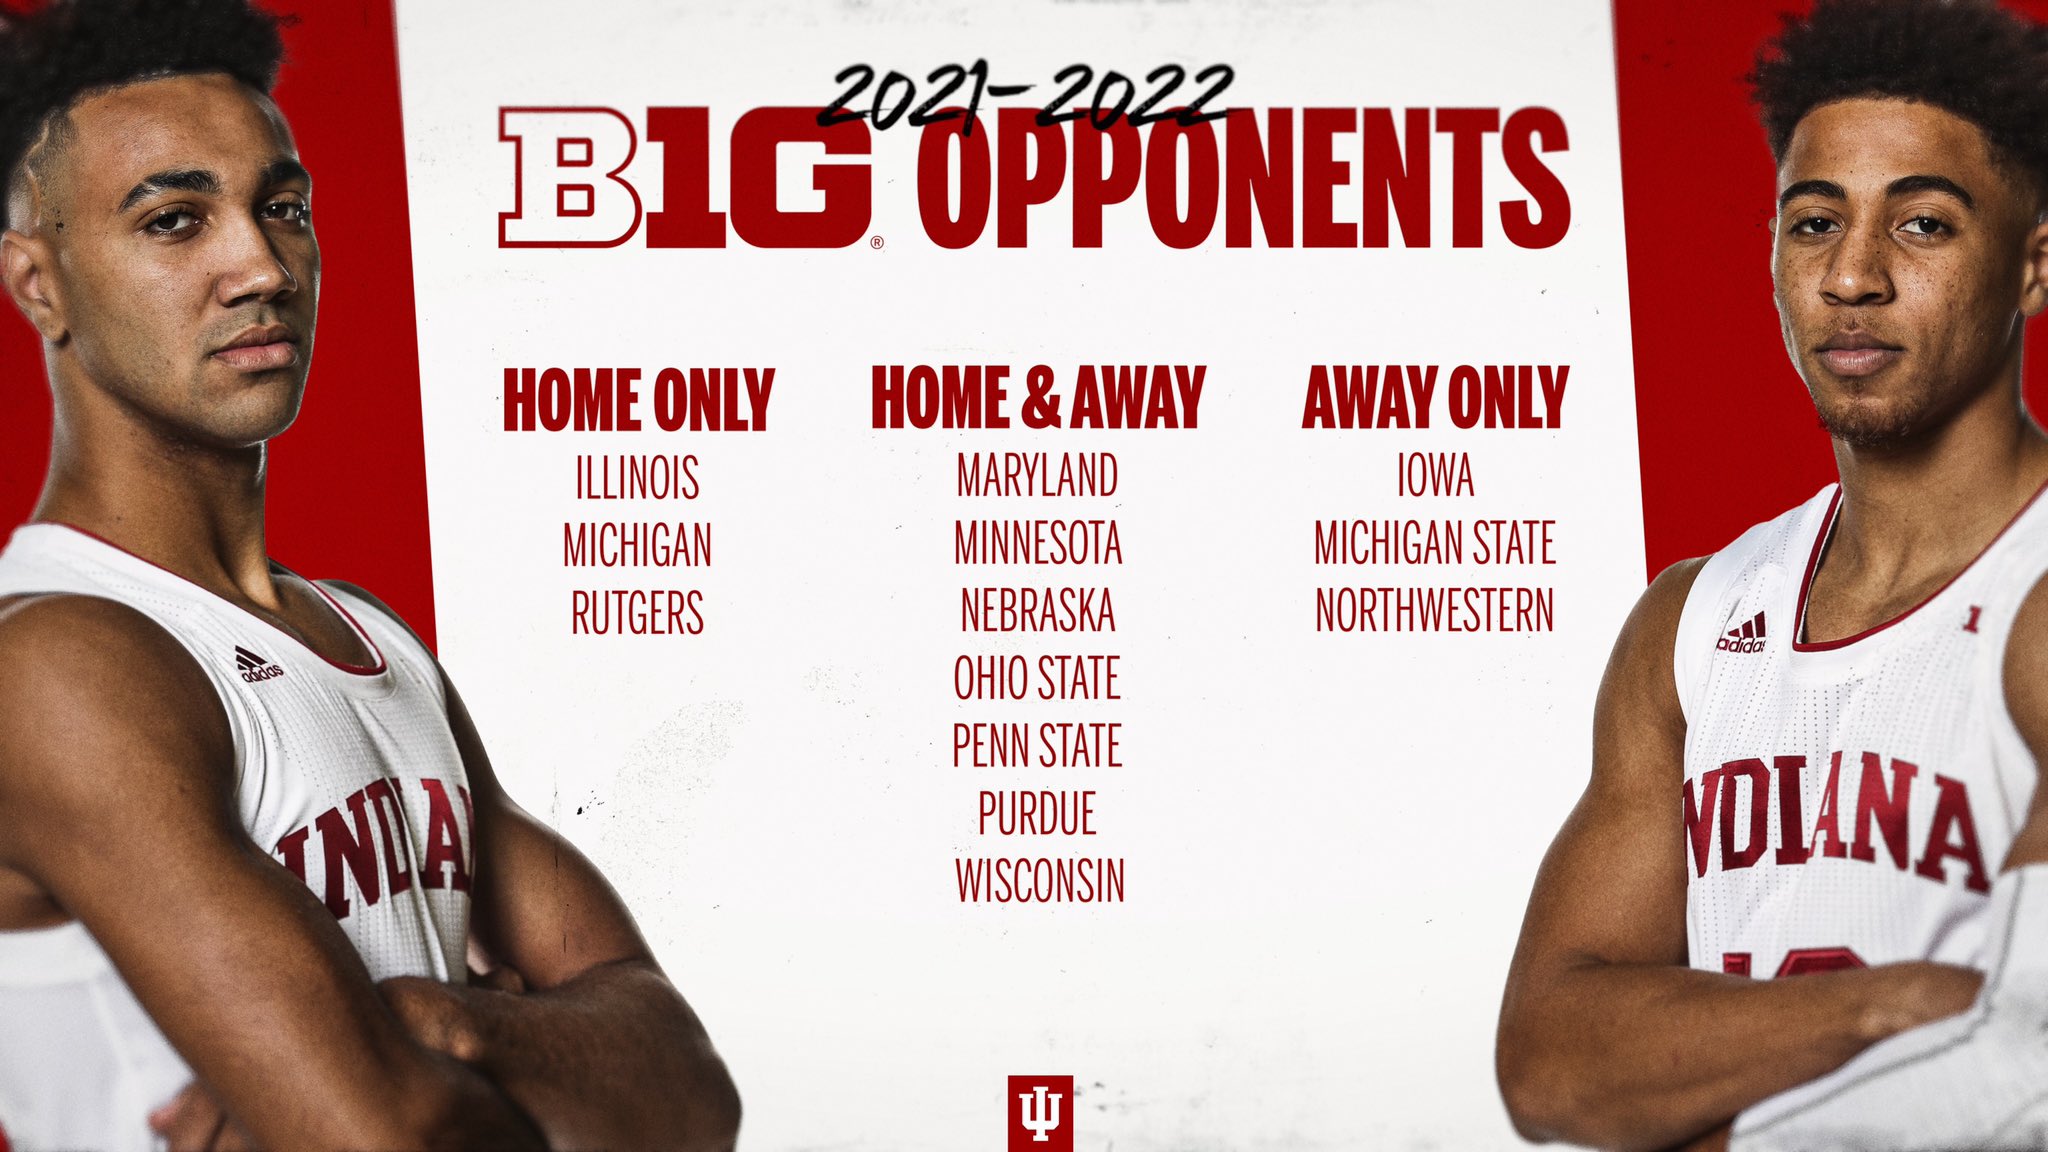 Indiana Basketball Schedule 2022 Indiana Basketball On Twitter: "🚨 2021-2022 B1G Opponents ↴  Https://T.co/K85Bo5Vcd4" / Twitter